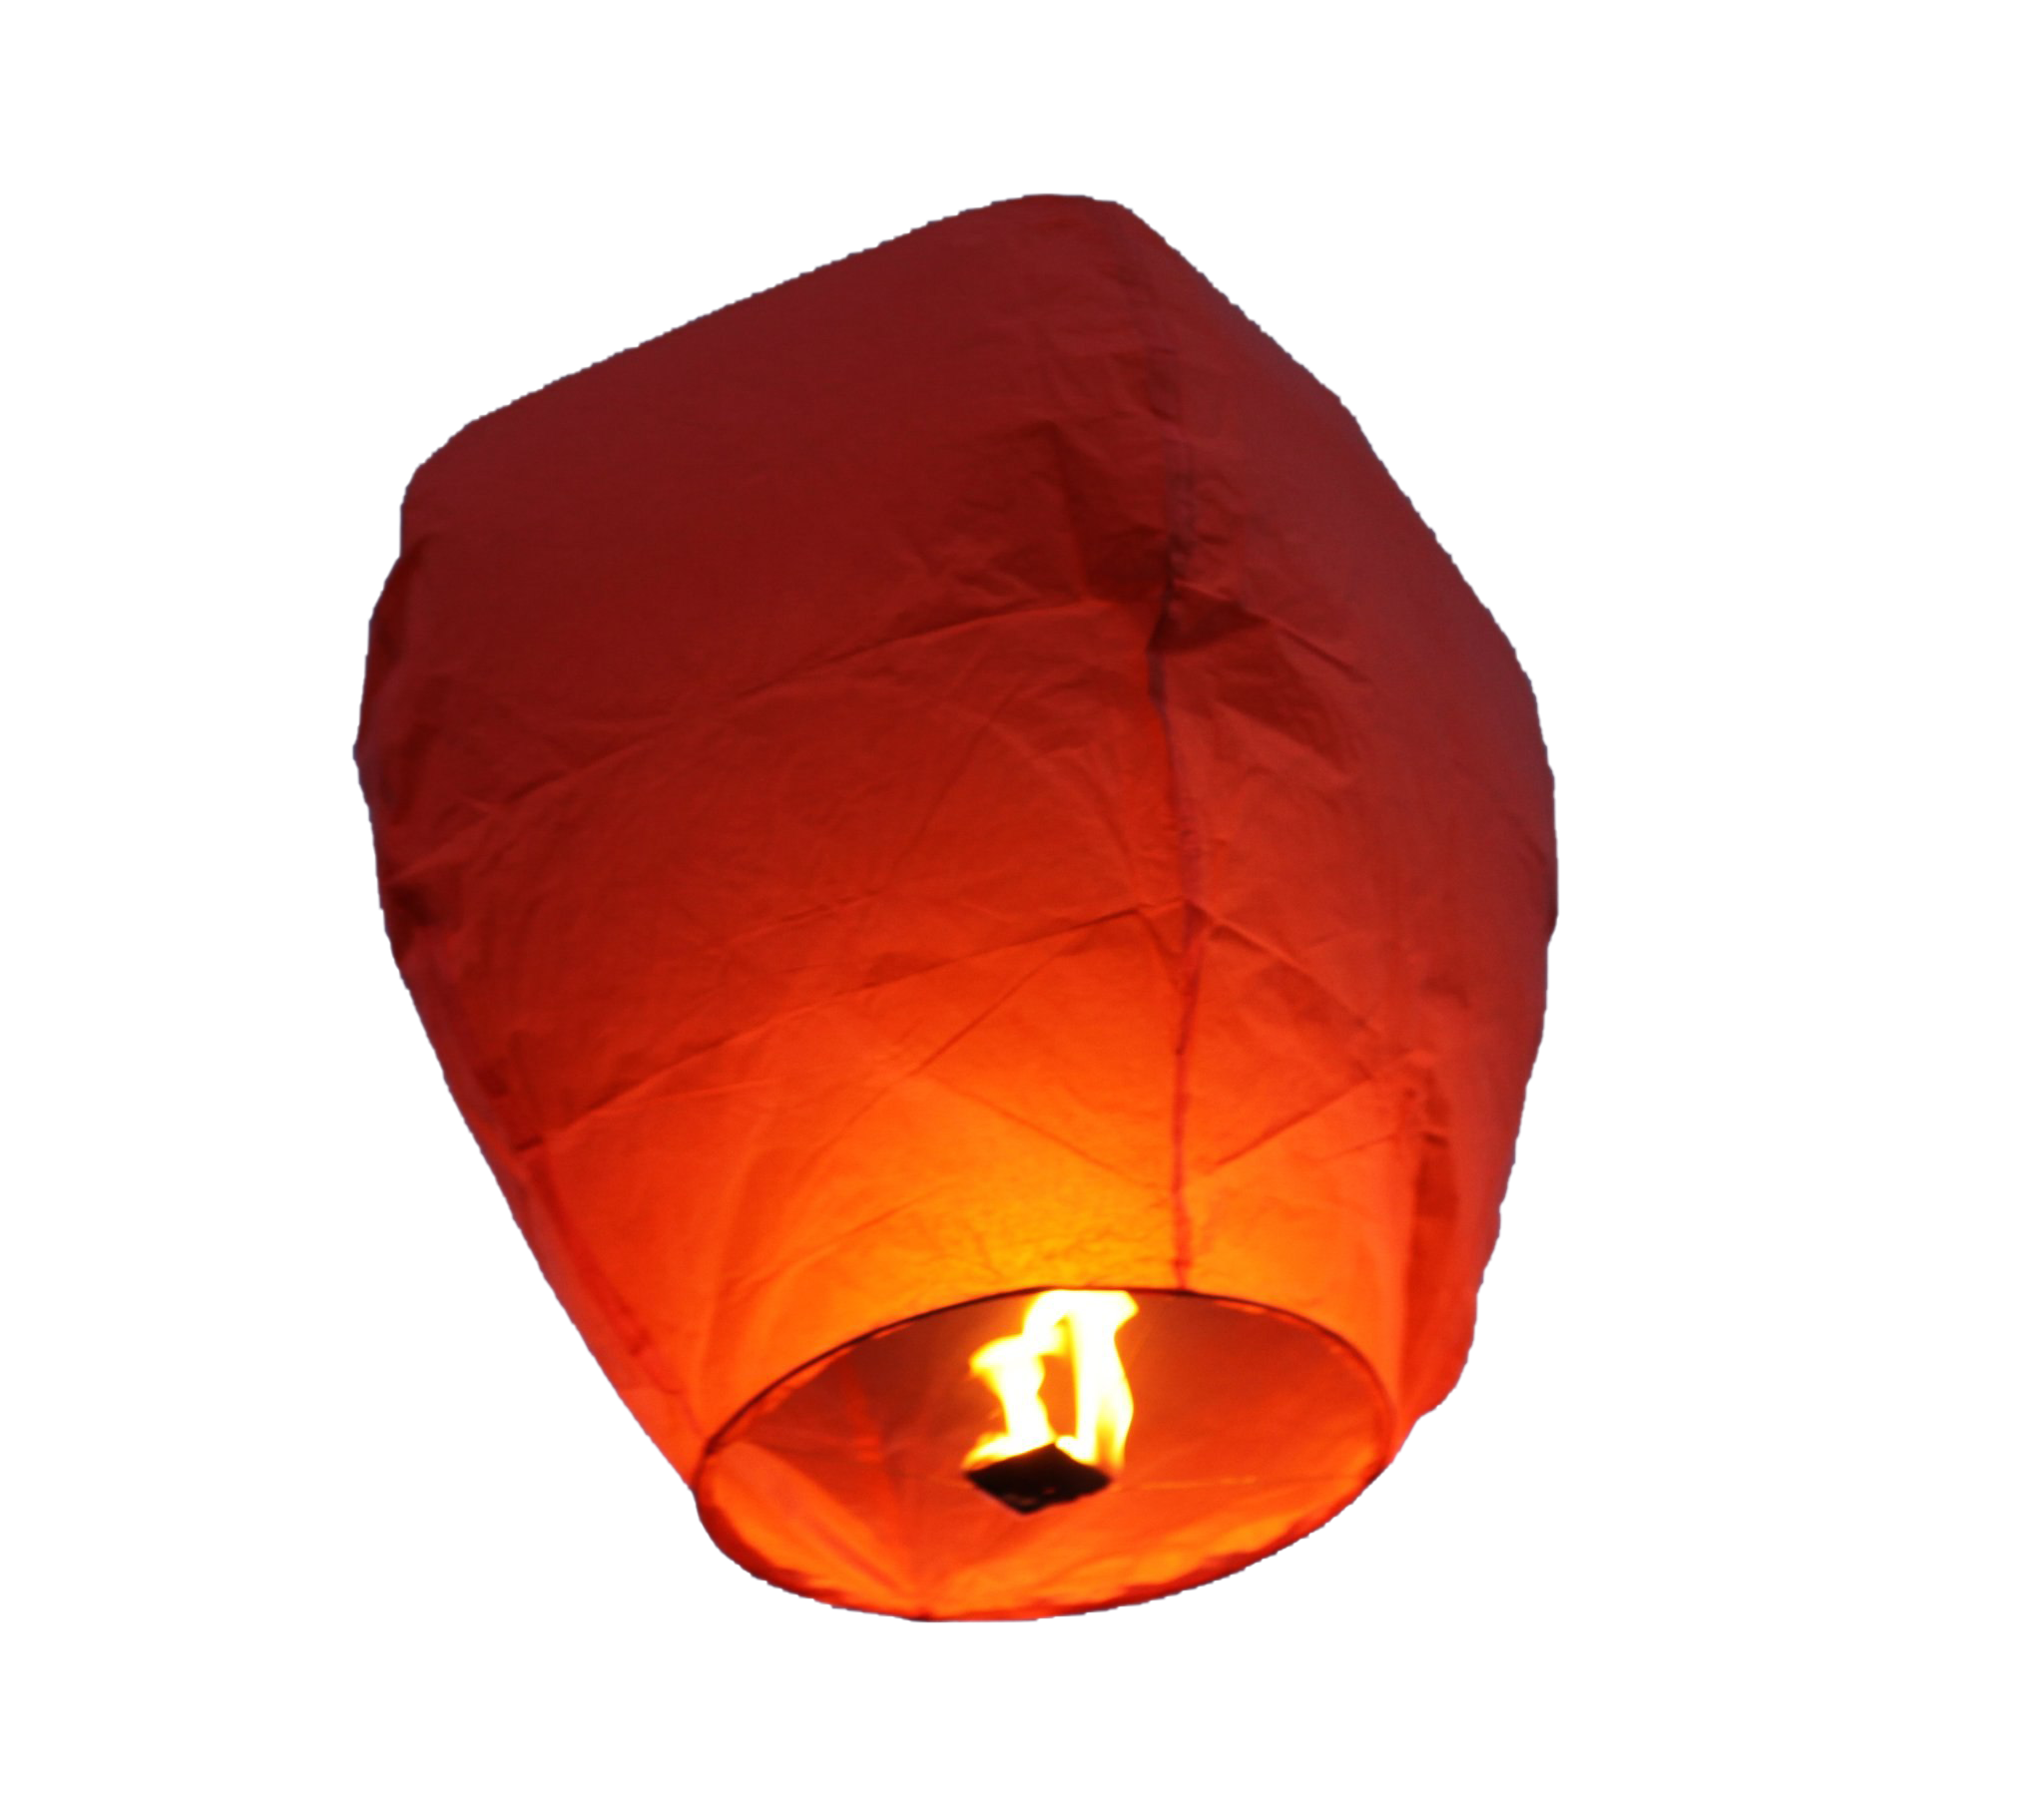 Download PNG image - Sky Lantern Download PNG Isolated Image 